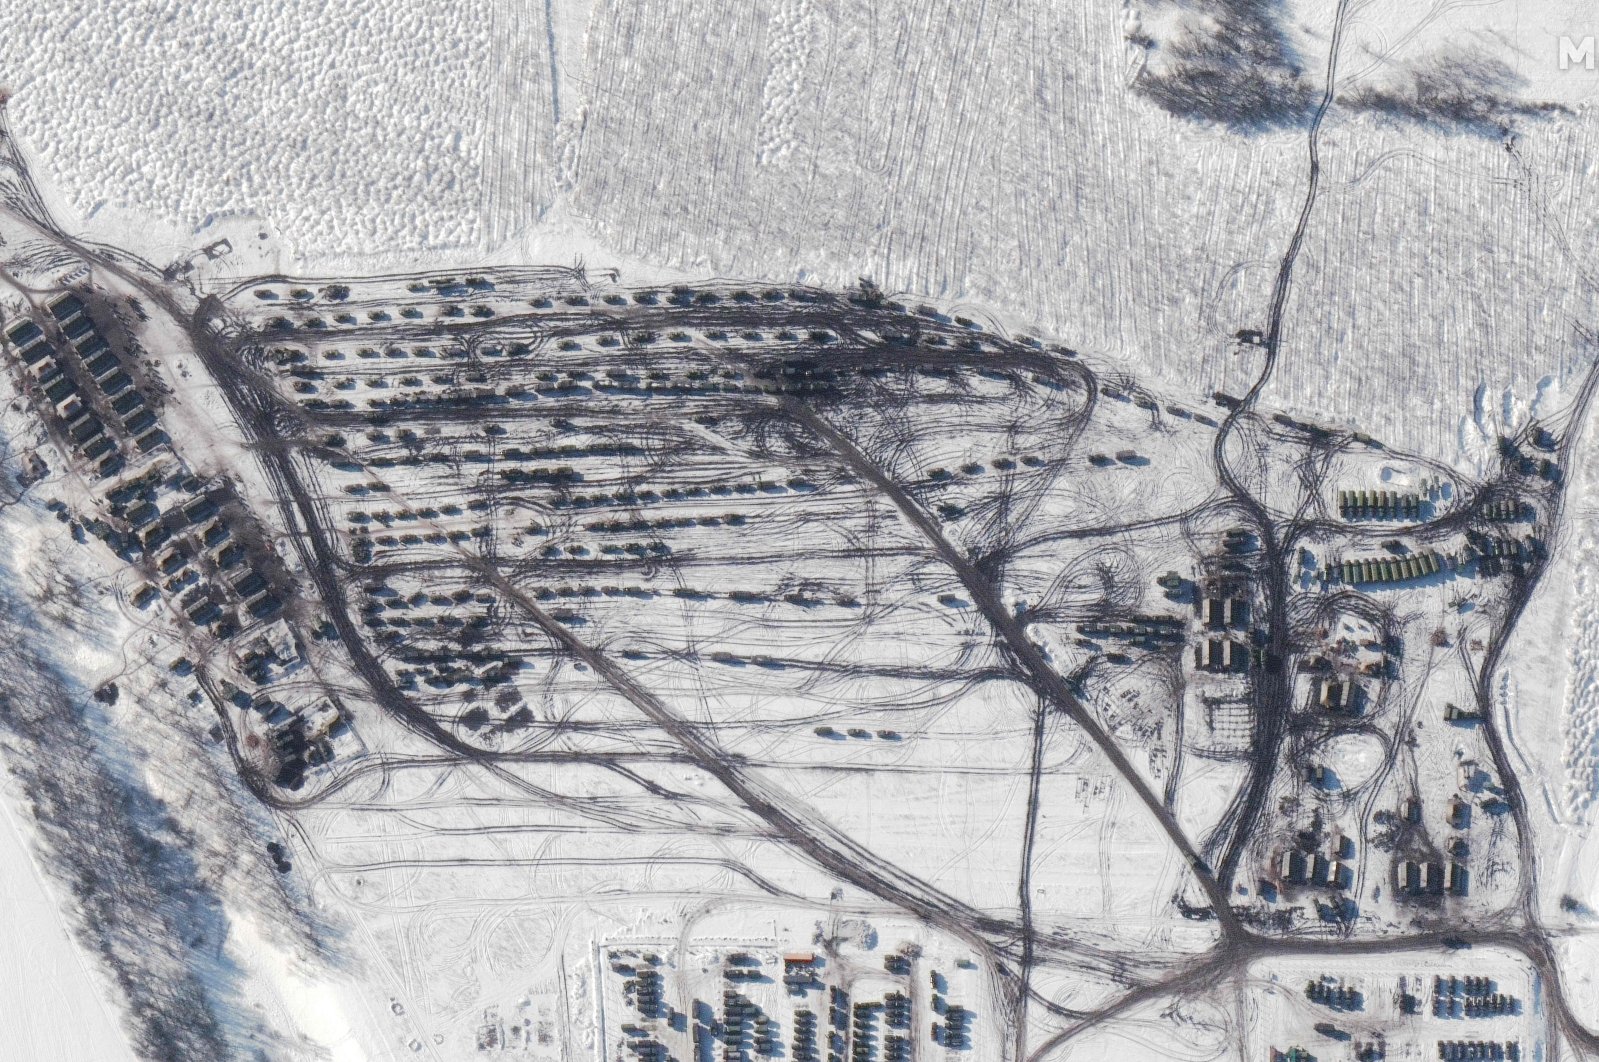 This satellite image released by Maxar Technologies shows a closer view of a battle group in formation in Soloti, Russia, Feb. 13, 2022. (Satellite image/2022 Maxar Technologies via AFP)